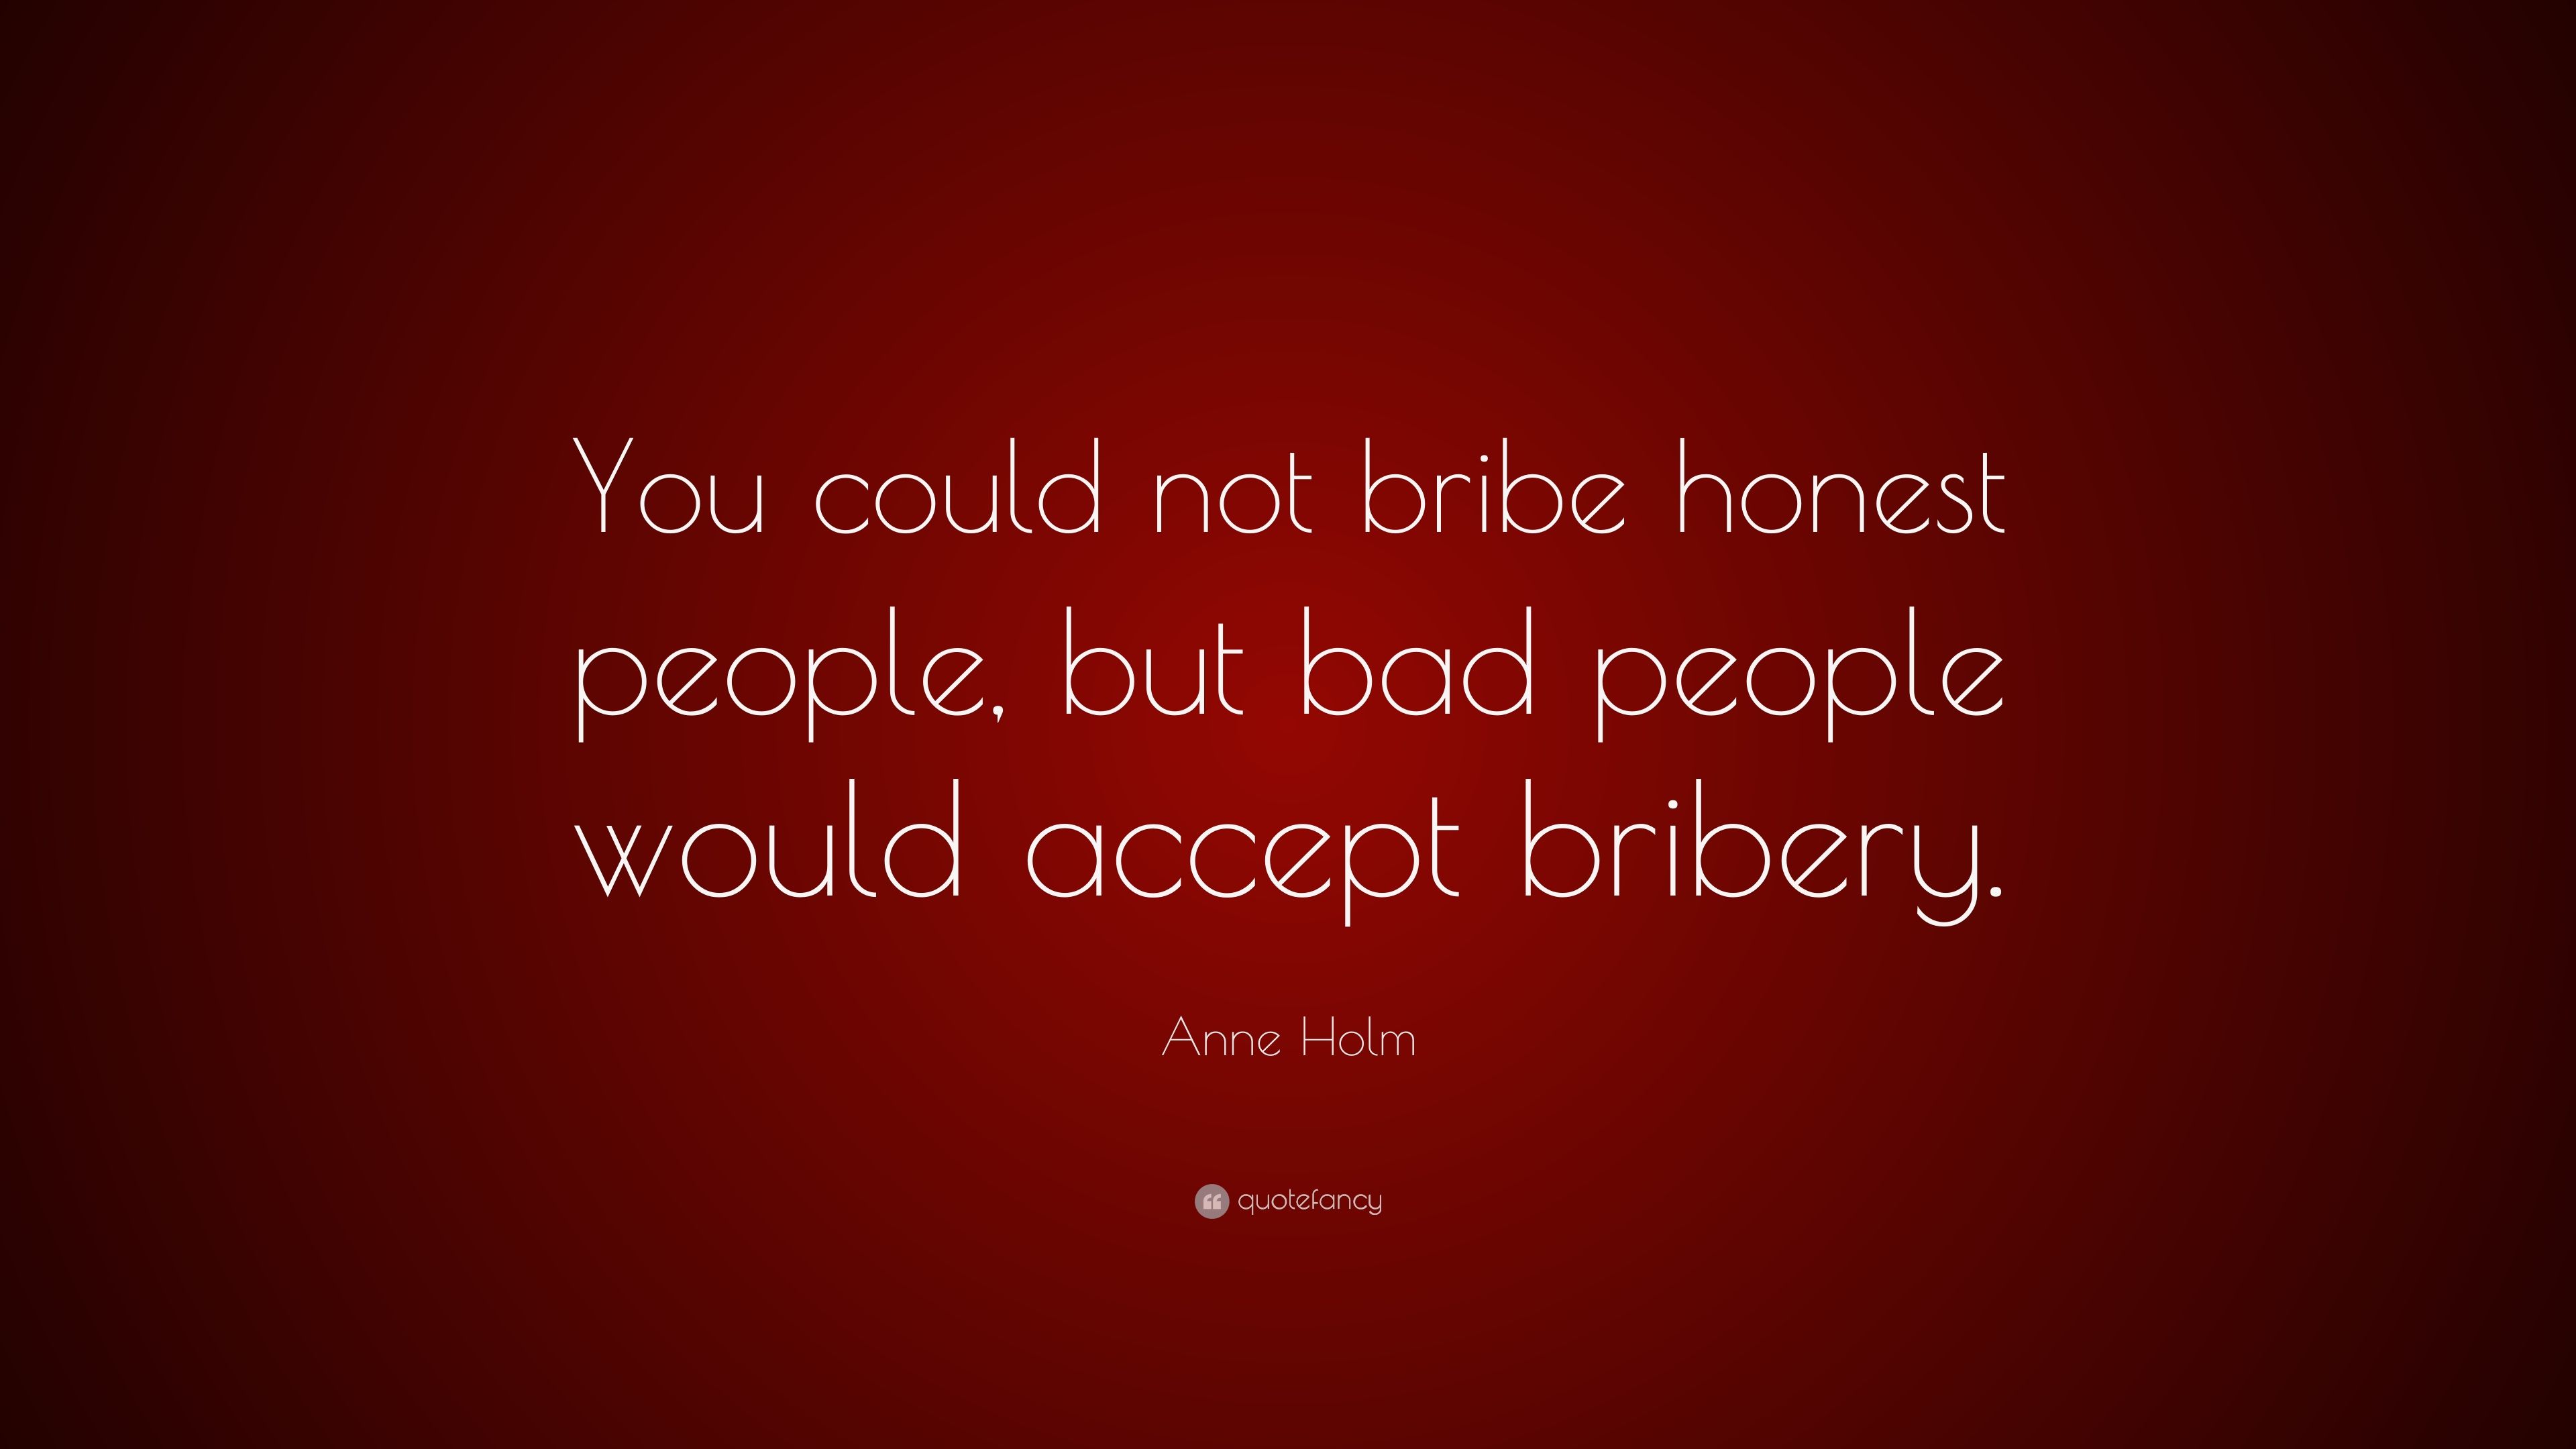 Anne Holm Quote: “You could not bribe honest people, but bad